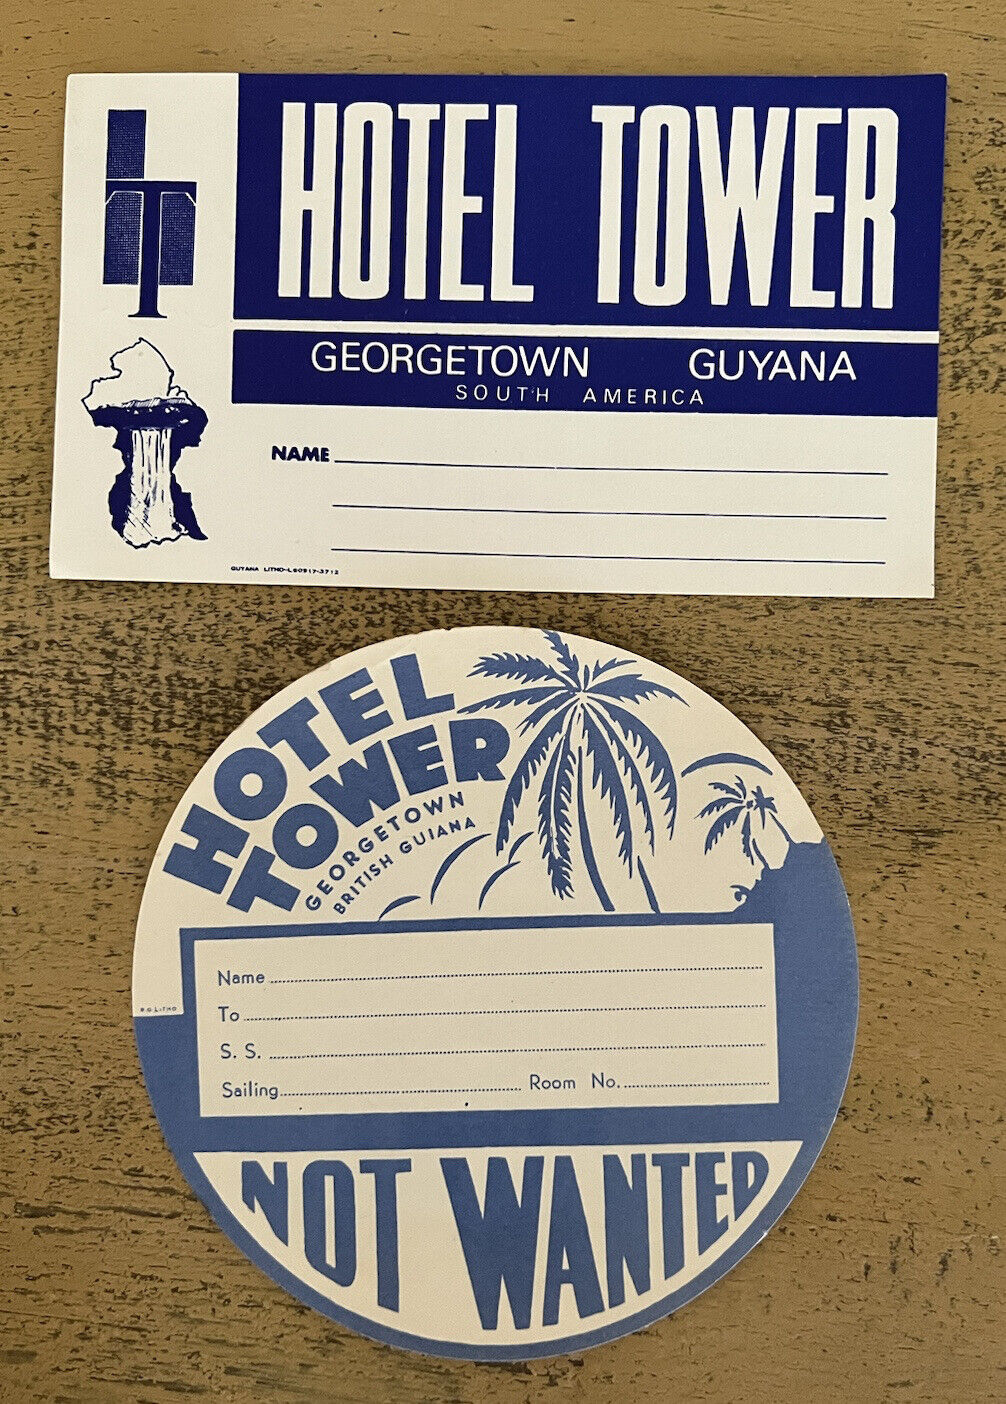 Hotel Tower Georgetown British Guyana Luggage Label Not Sticky Vintage Lot Of 2